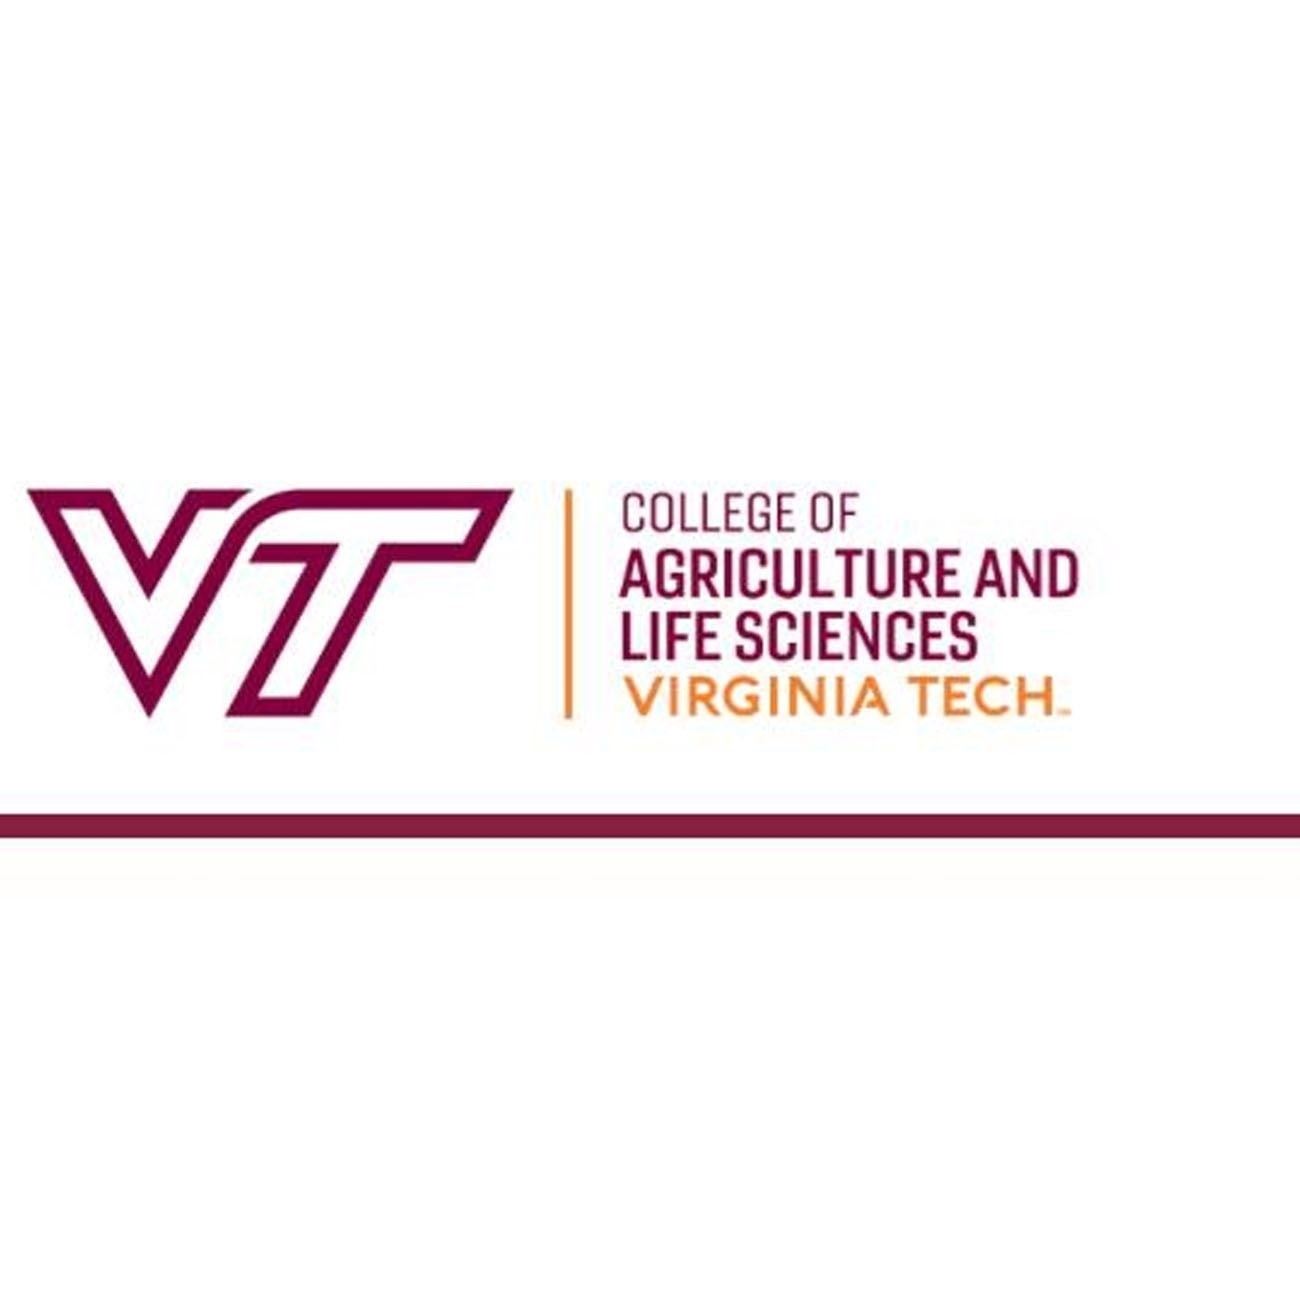 Virginia Tech College of Agriculture & Life Sciences through its Virginia Cooperative Extension